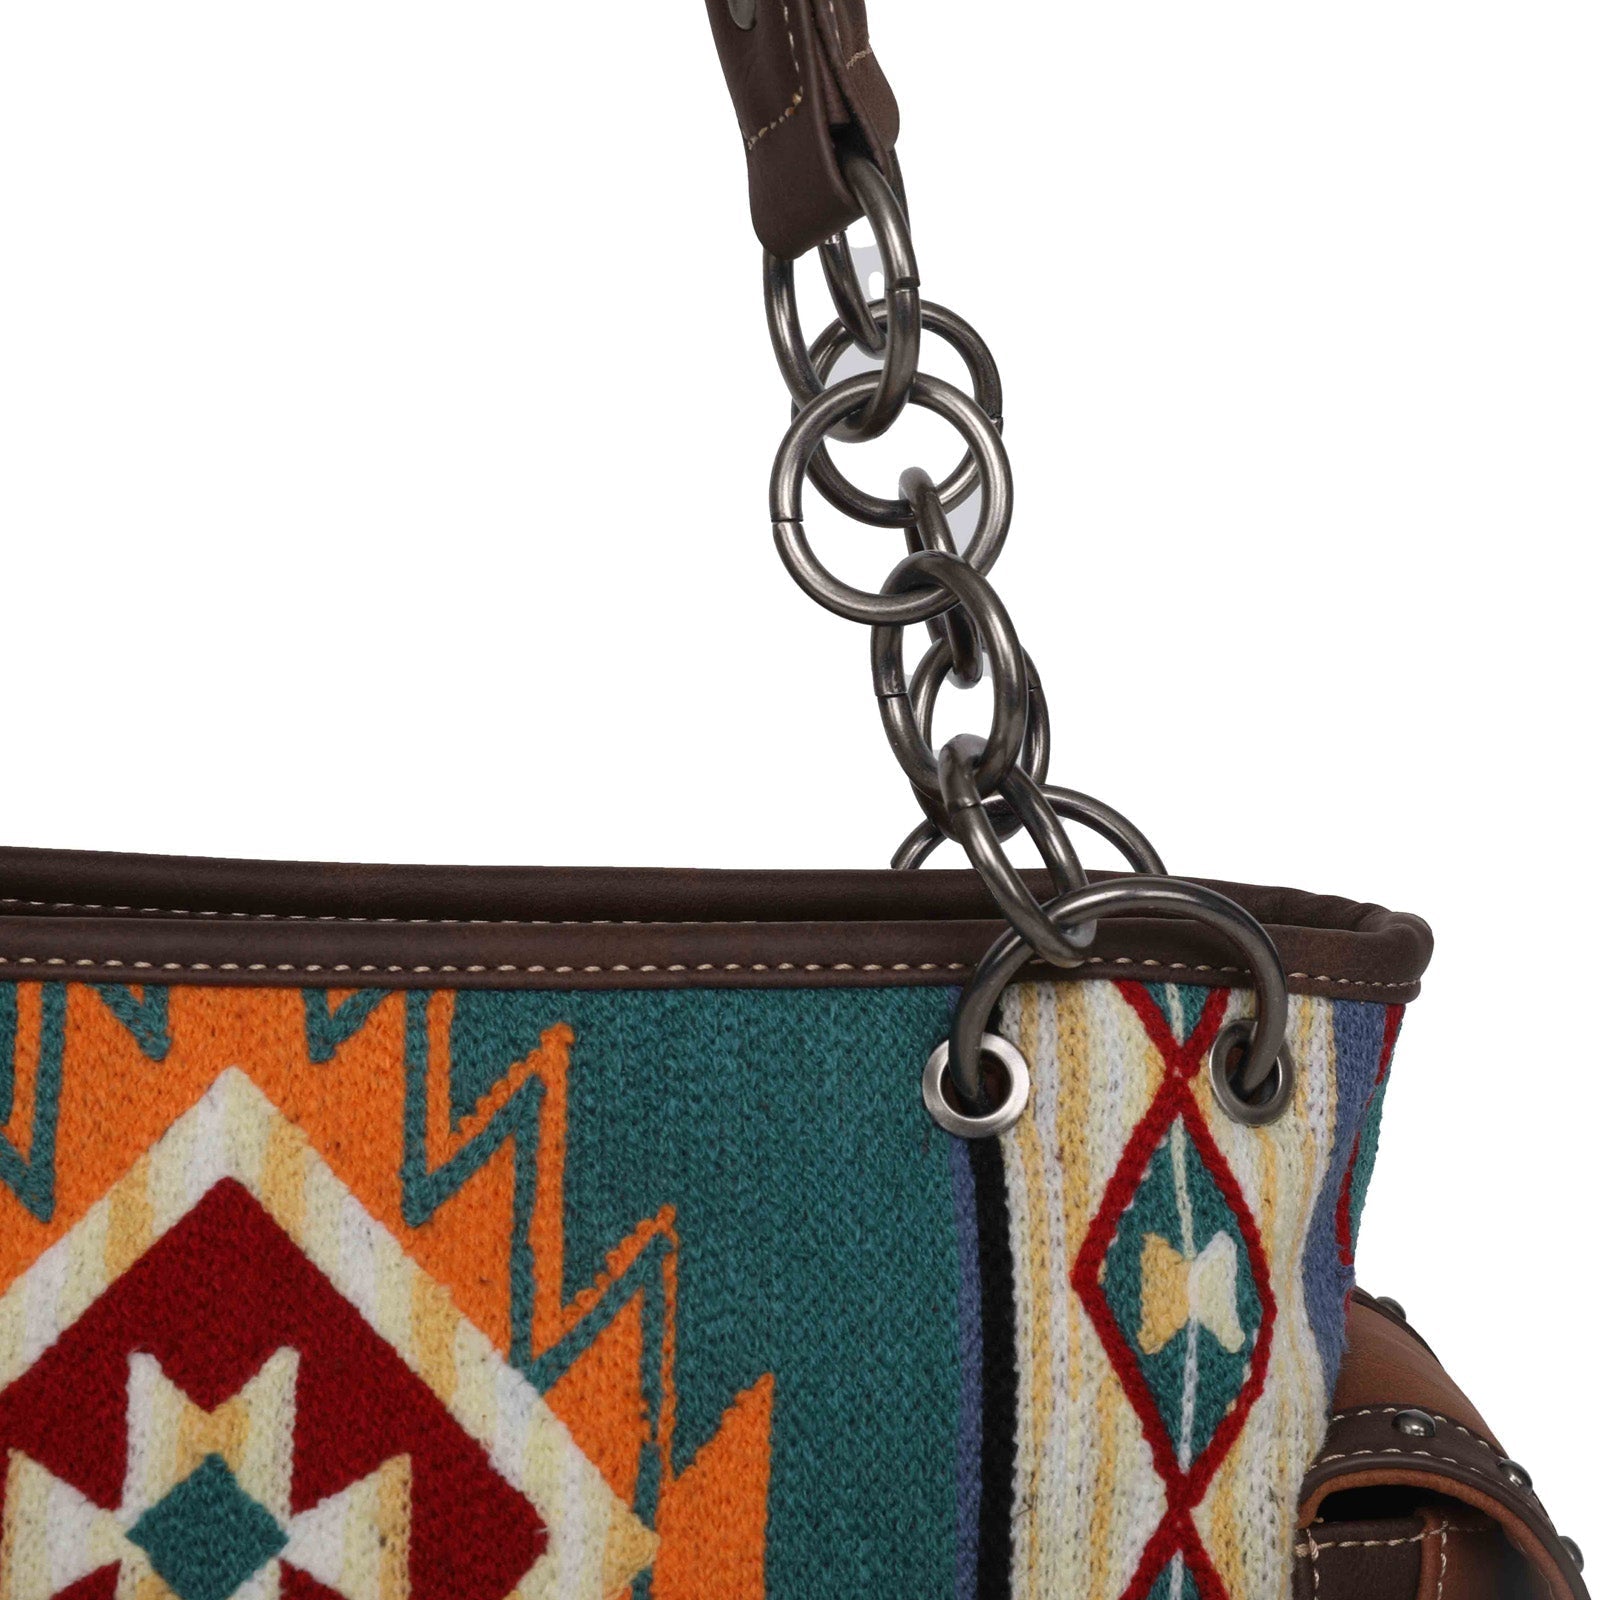 Montana West Aztec Tapestry Concealed Carry Satchel - Cowgirl Wear